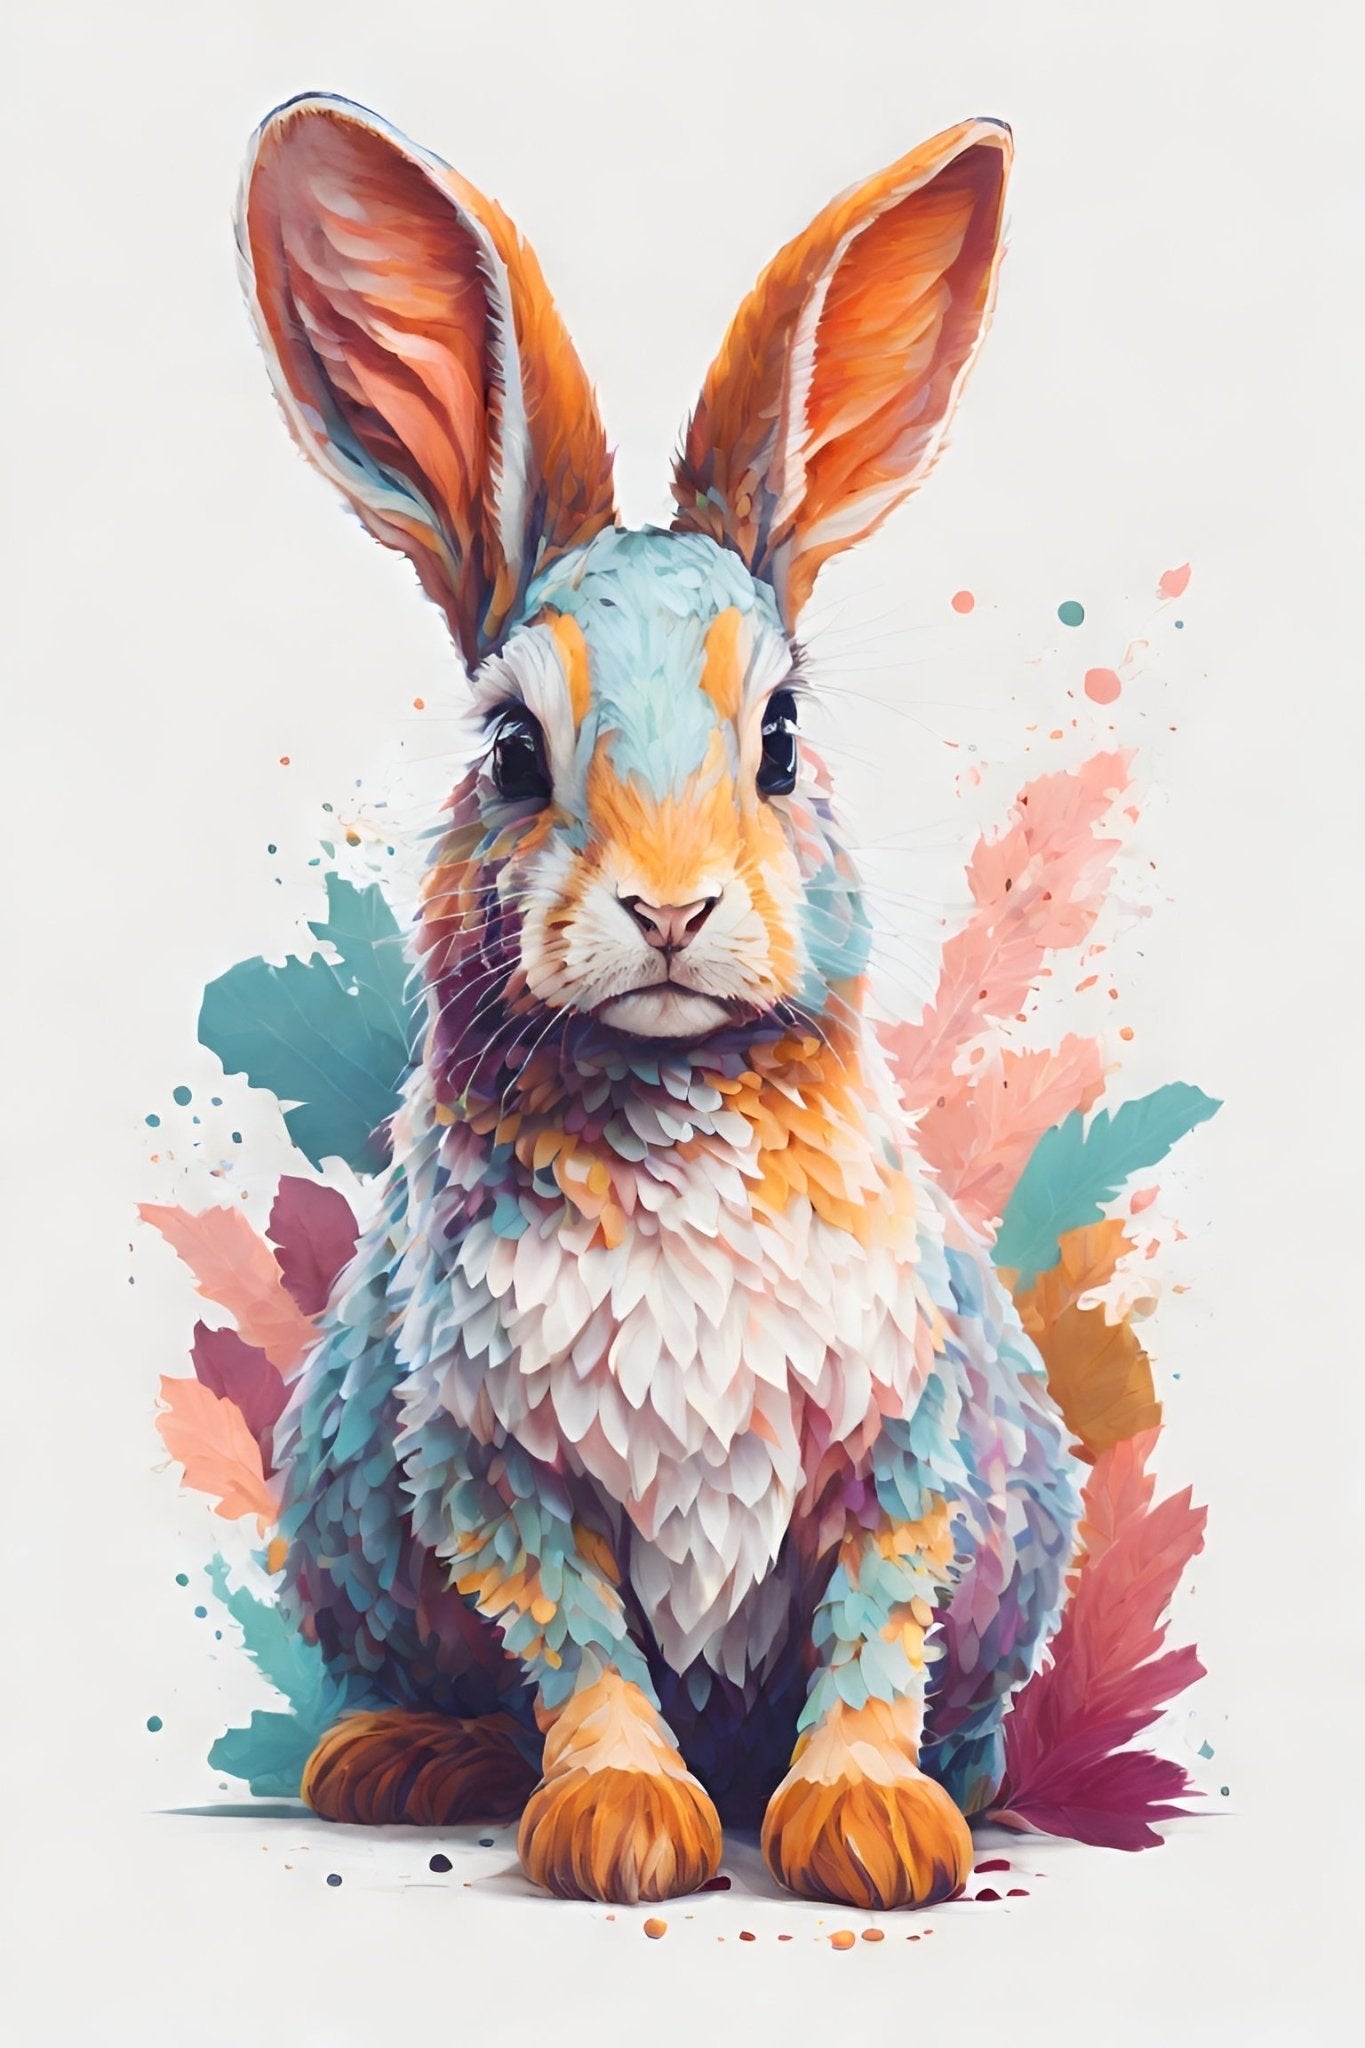 Pastel Rabbit Fantasy - Paint by Numbers - Artslo.com